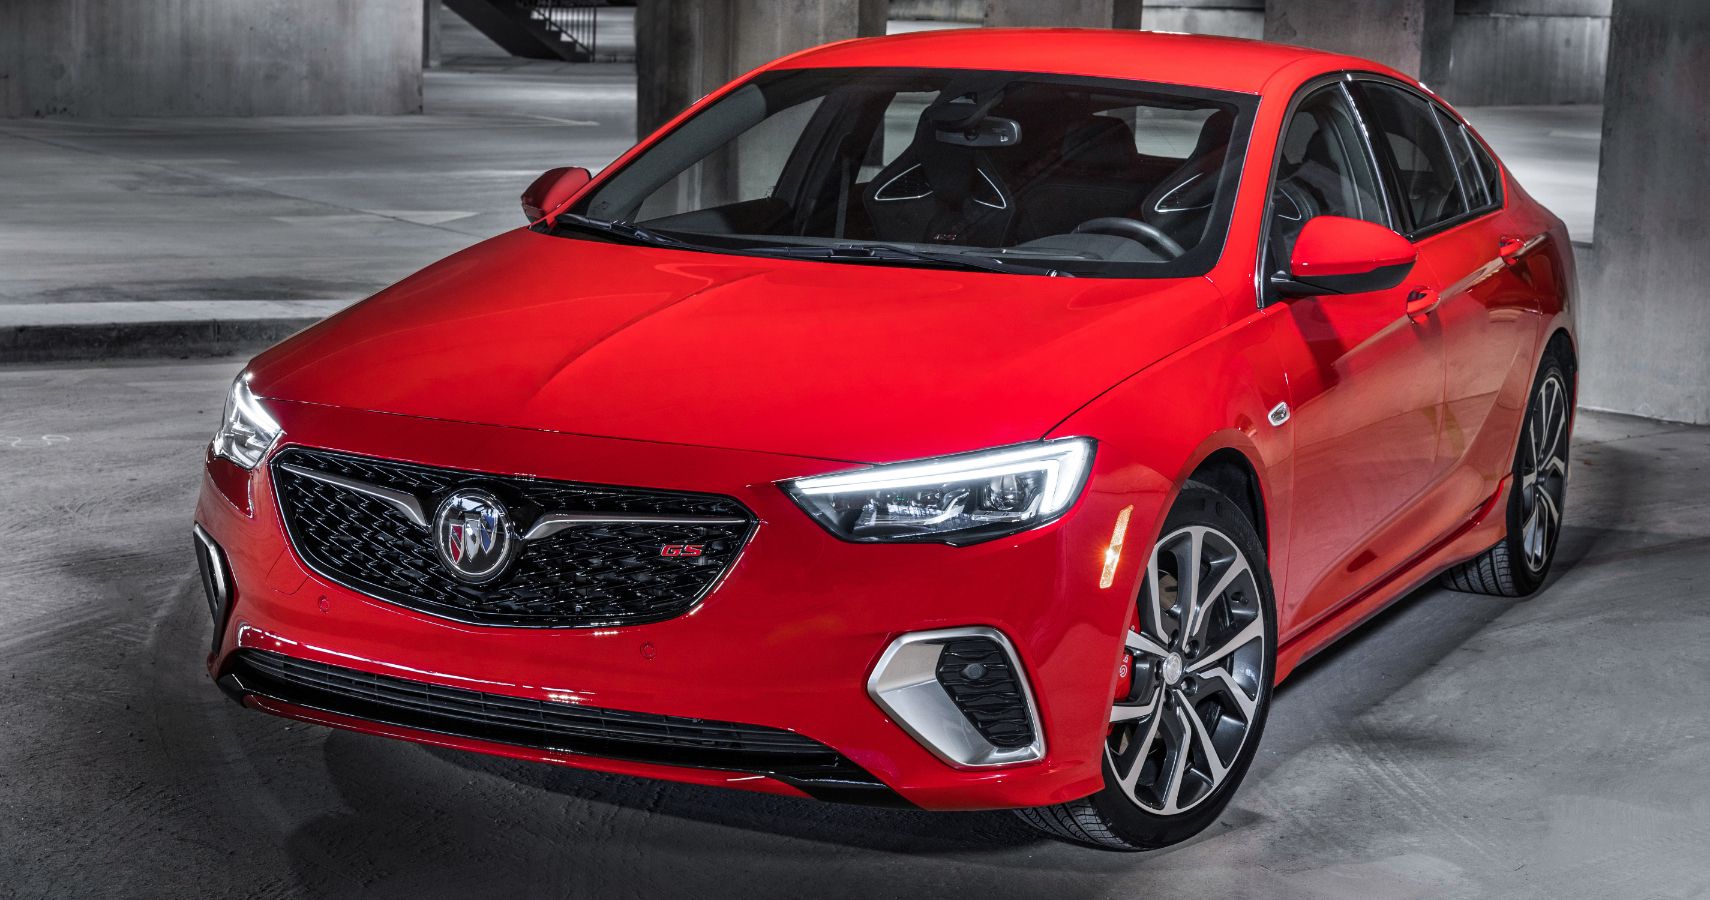 2018-buick-regal-gs-exterior-front-view